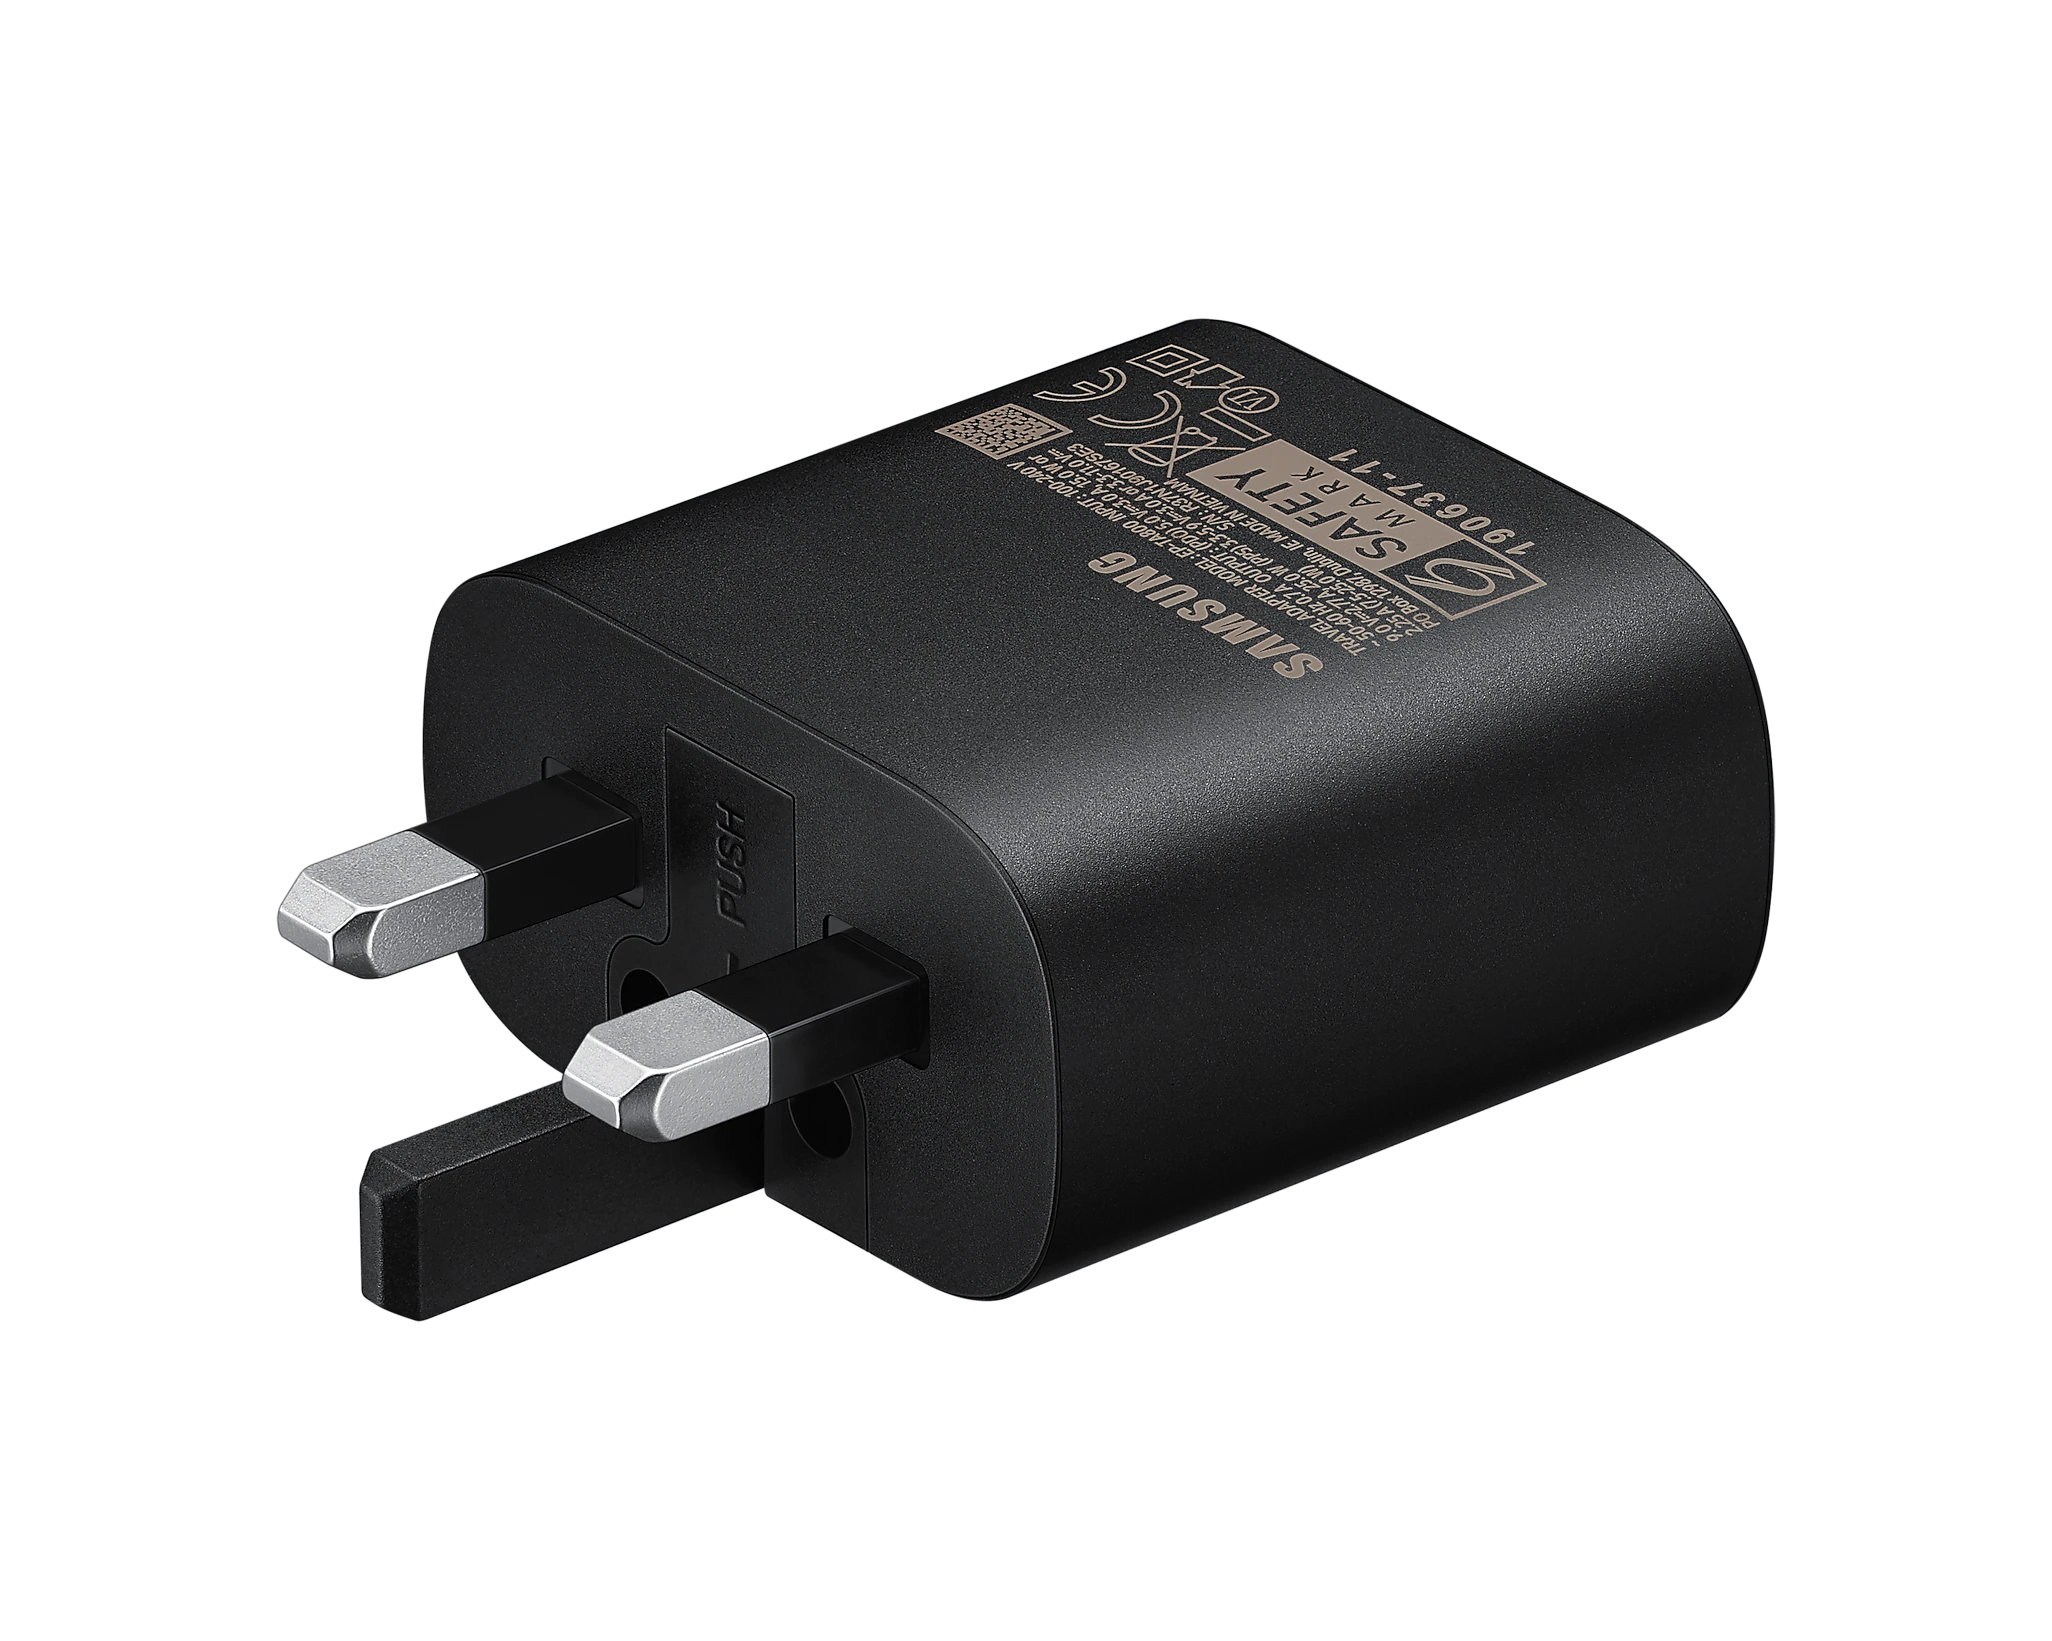 Samsung EP-TA800 25W Travel Adapter (Super Fast Charging with USB Type-C Cable) - Black